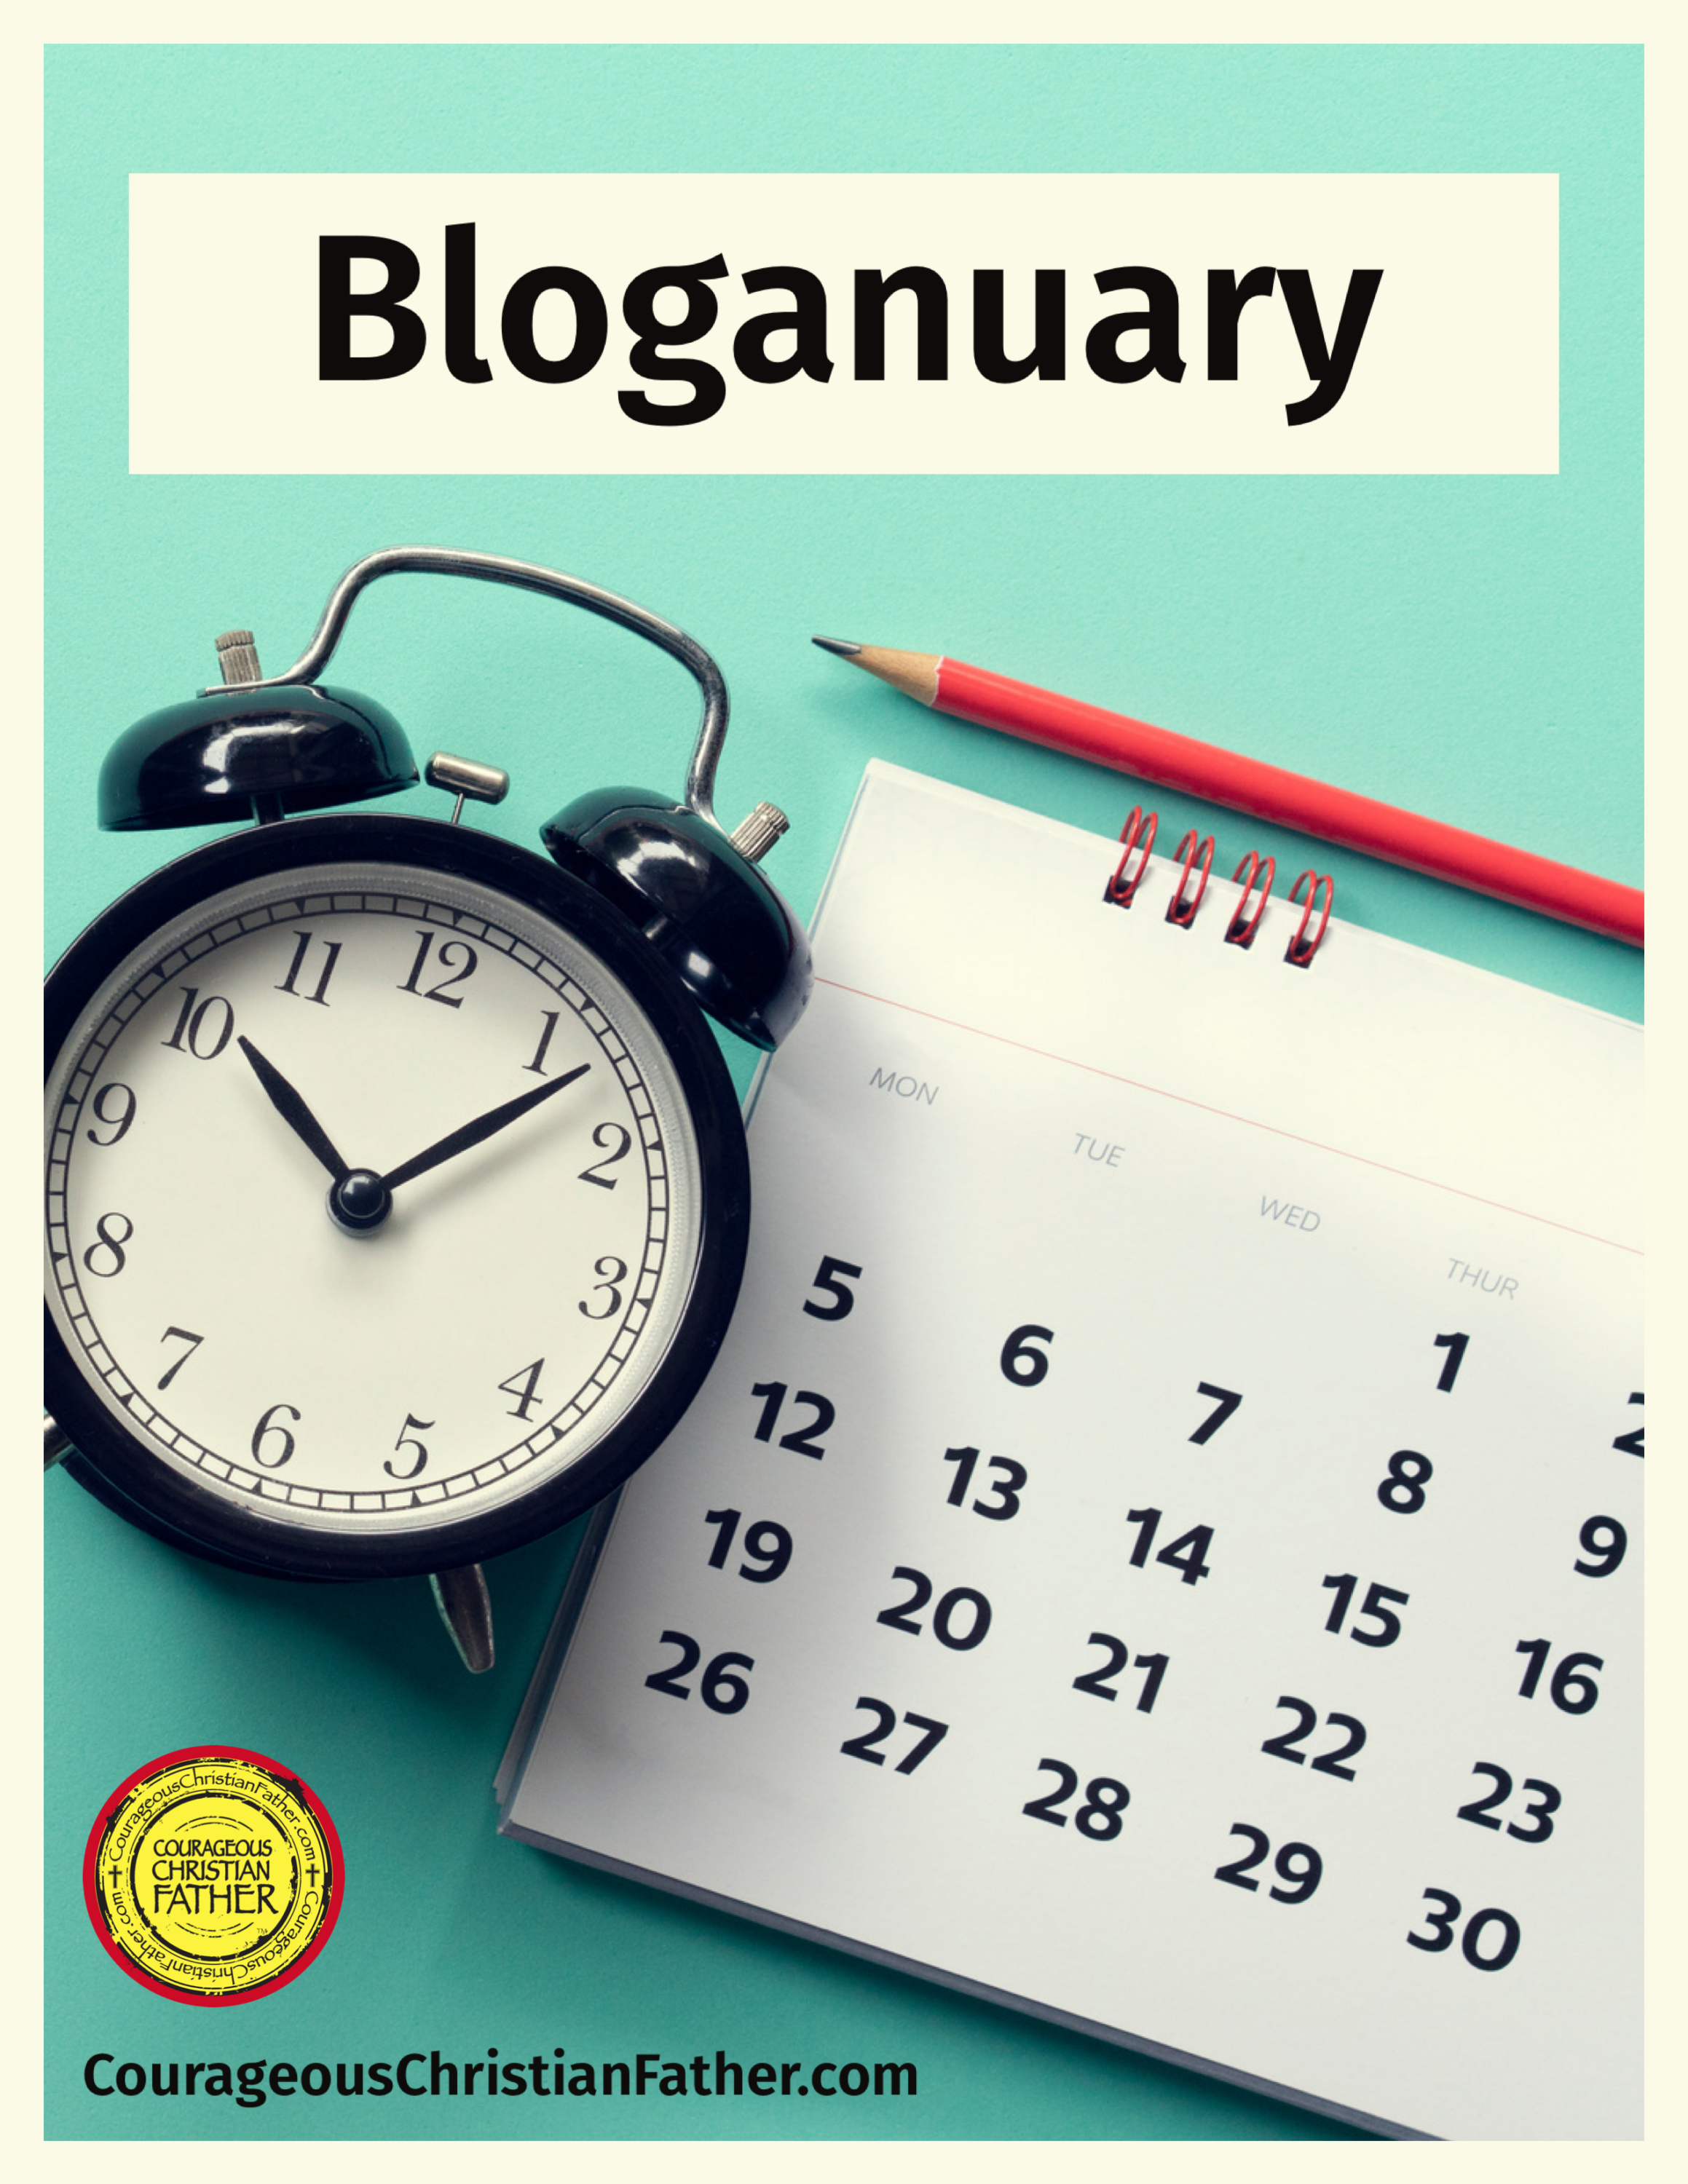 Bloganuary and the Power of Consistent Writing - January is often synonymous with New Year's resolutions, fresh starts, and setting ambitious goals for the months ahead. In the spirit of embracing creativity and establishing positive habits, a growing trend has emerged among bloggers worldwide: Bloganuary. This unique challenge encourages writers to publish a new blog post every day throughout the month of January. #Bloganuary